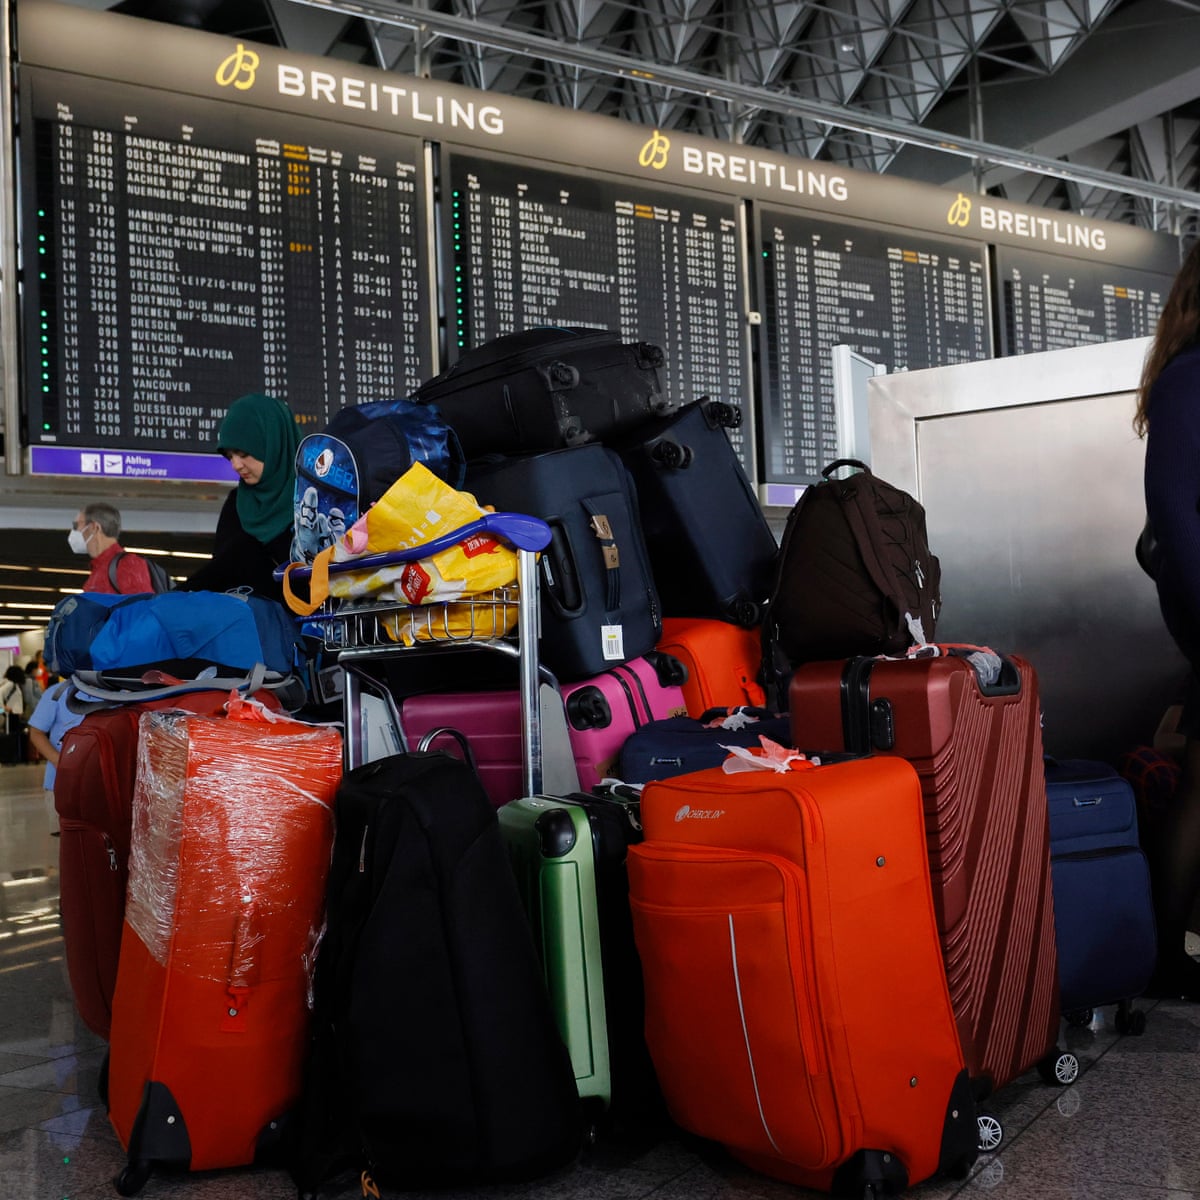 German tourists told to use colourful luggage to avoid airport